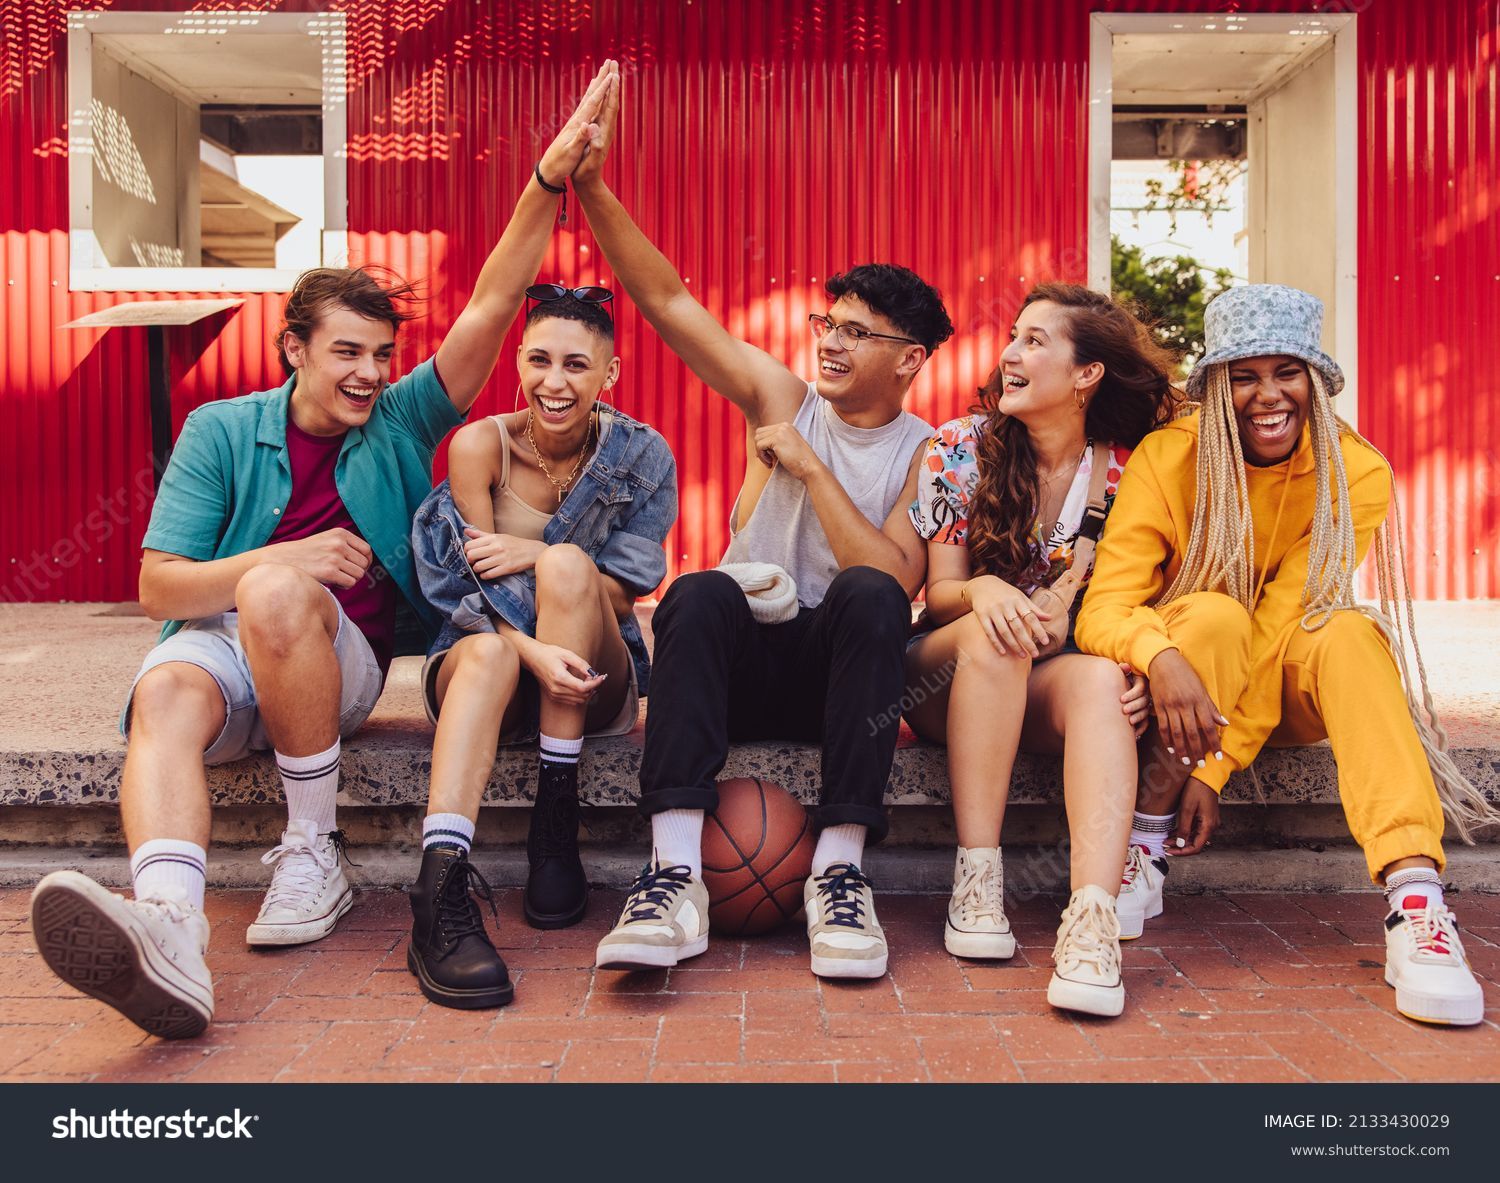 Here's to friendship. Group of multiethnic young people enjoying hanging out together outdoors in the city. Cheerful generation z friends having fun and making happy memories. #2133430029